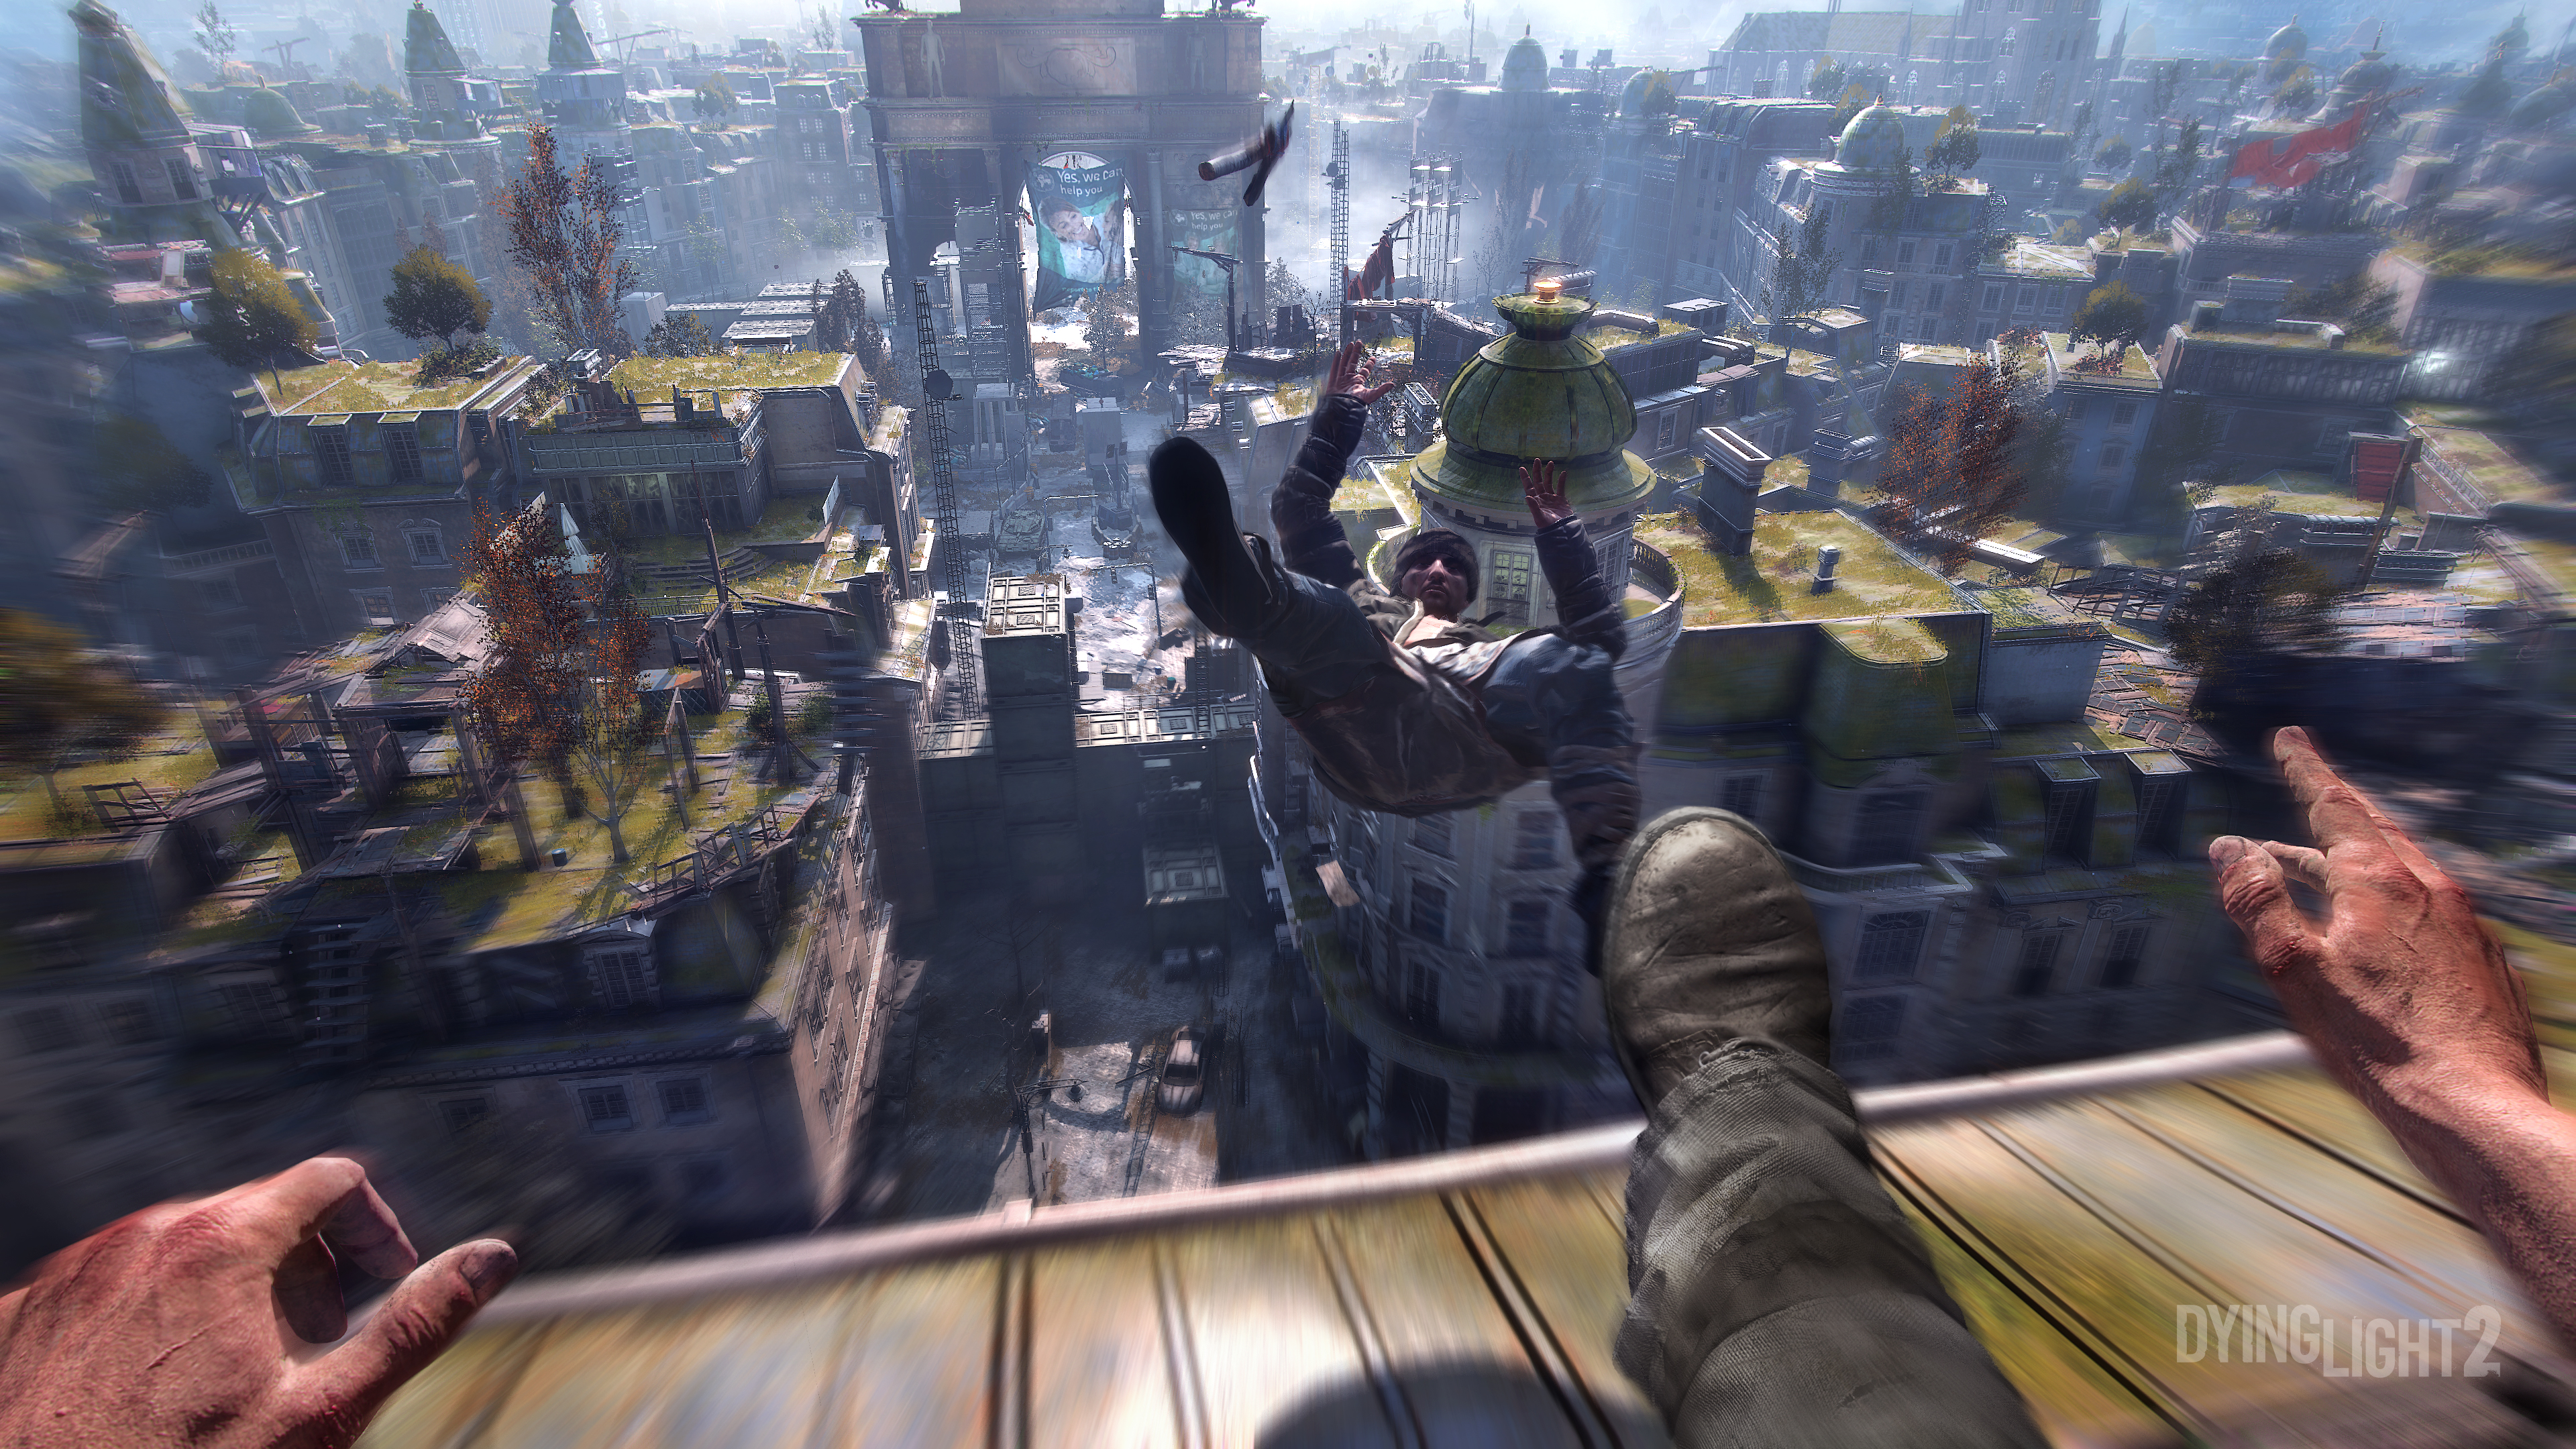 Dying Light 2' Beginners Guide: to Unlock Co-Op, Weapons Invite Friends